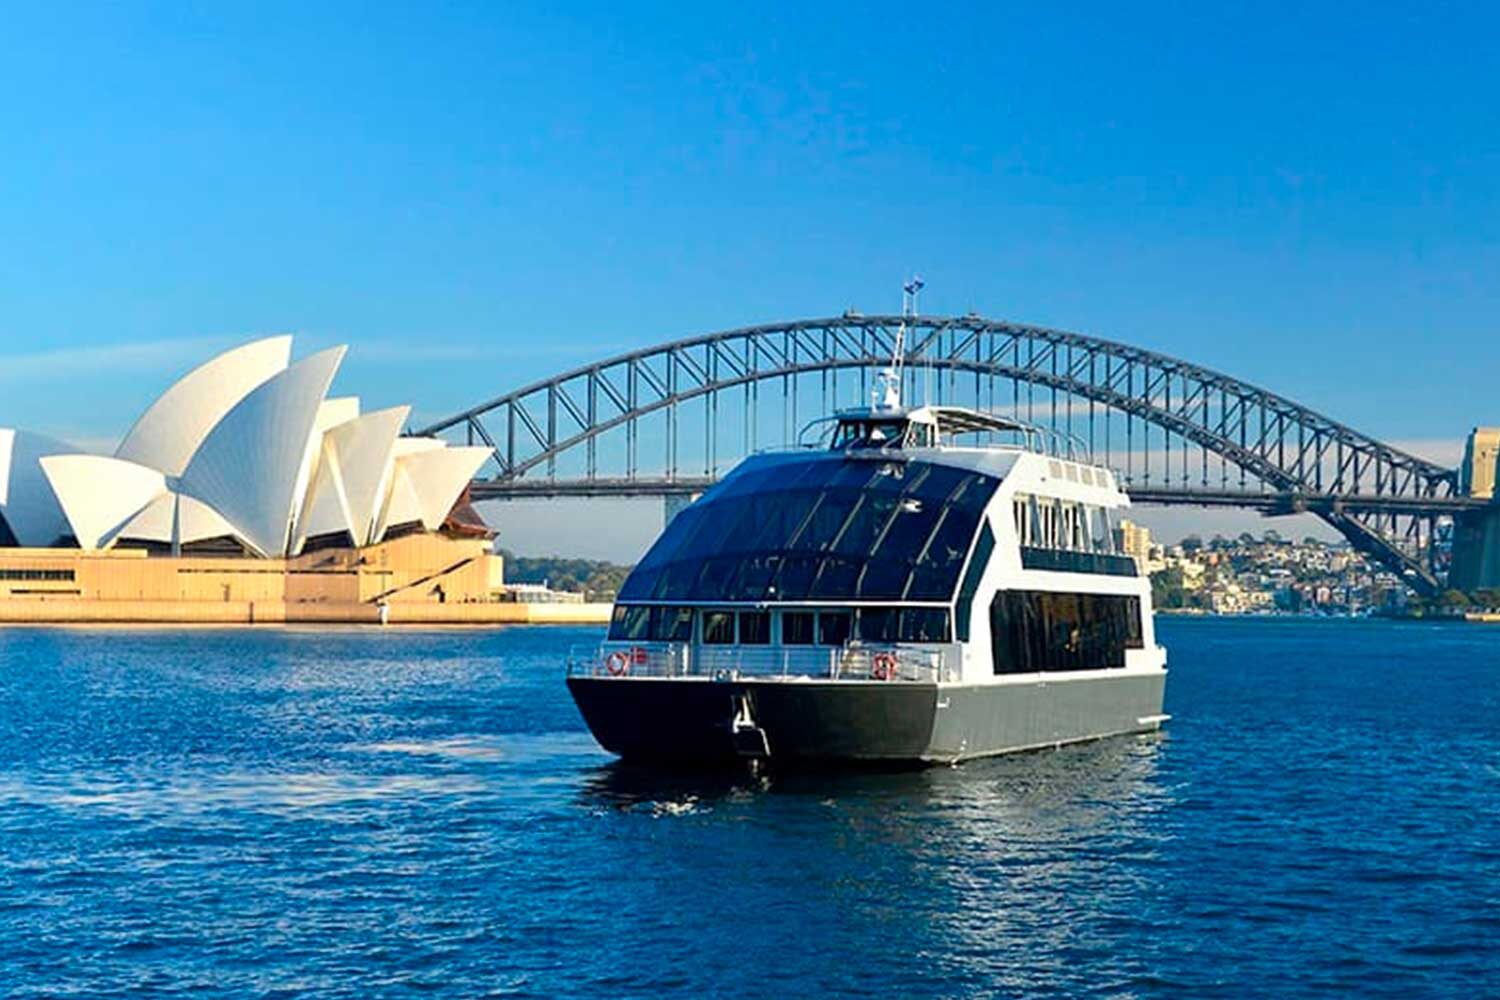 Captain Cook Cruise at Sydney Harbour